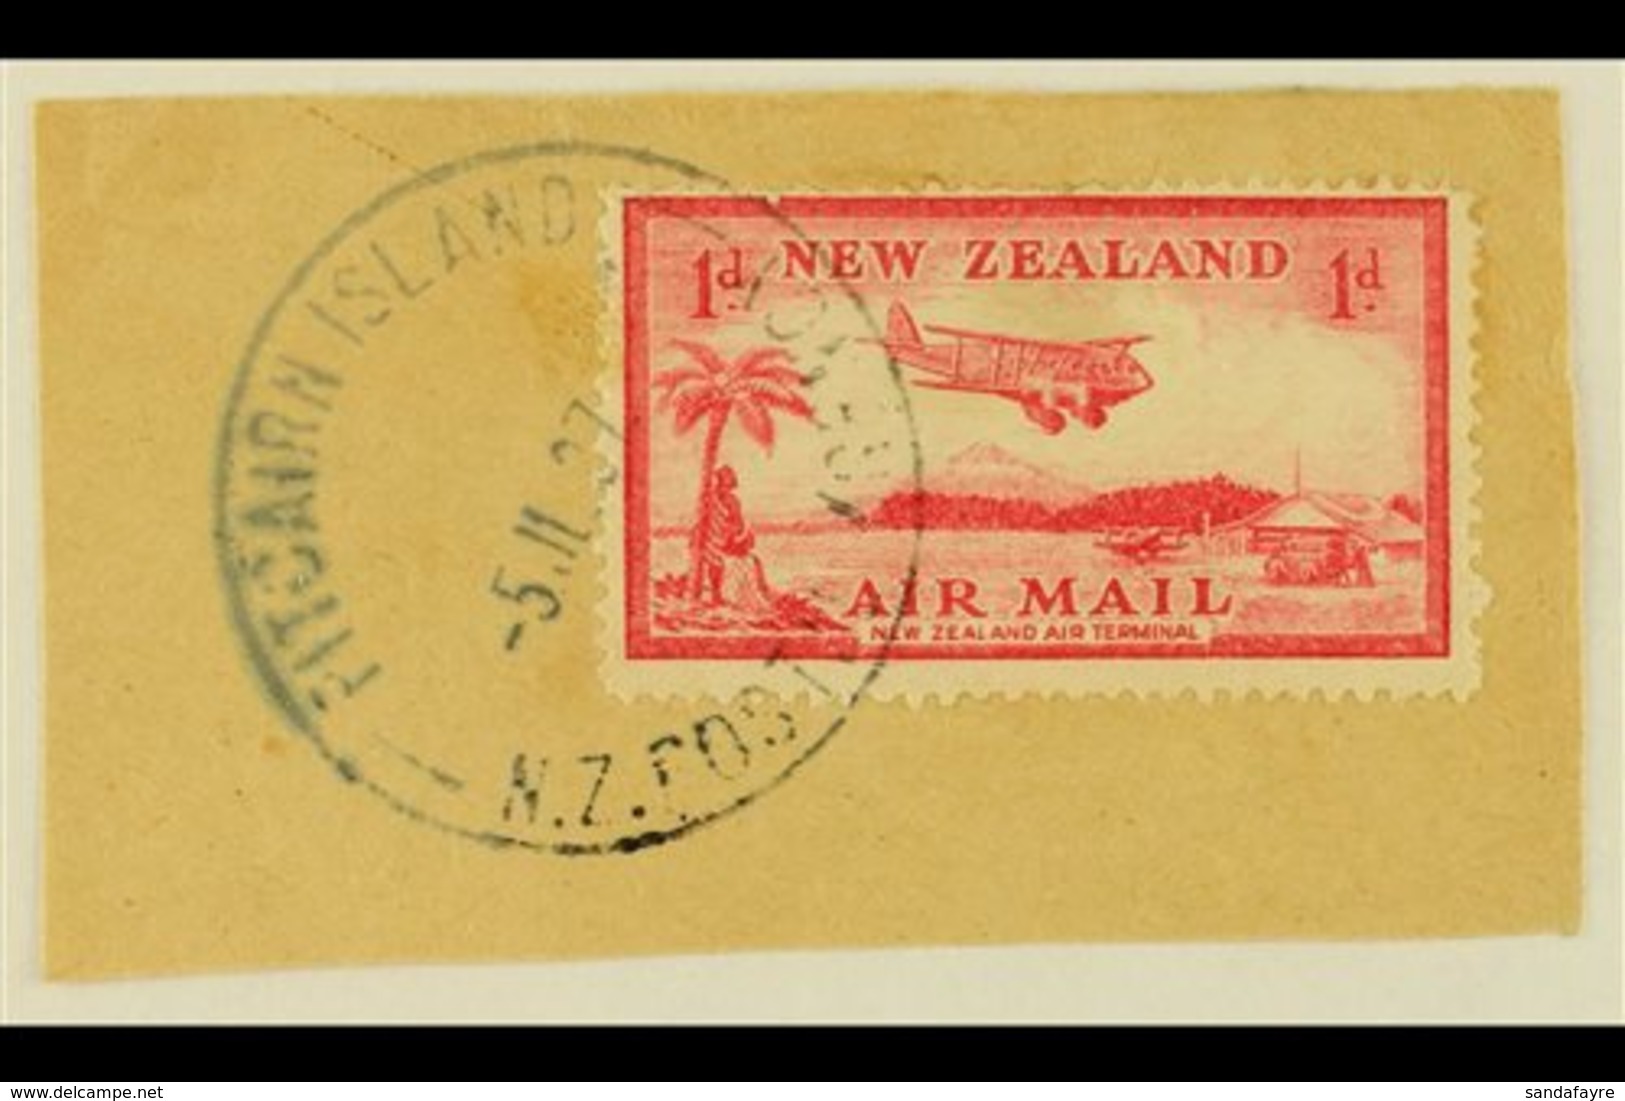 1937 1d Carmine Air Stamp Of New Zealand, SG 570, On Piece Tied By Fine Full "PITCAIRN ISLAND" Cds Cancel Of 5 JL 37, Un - Pitcairn Islands